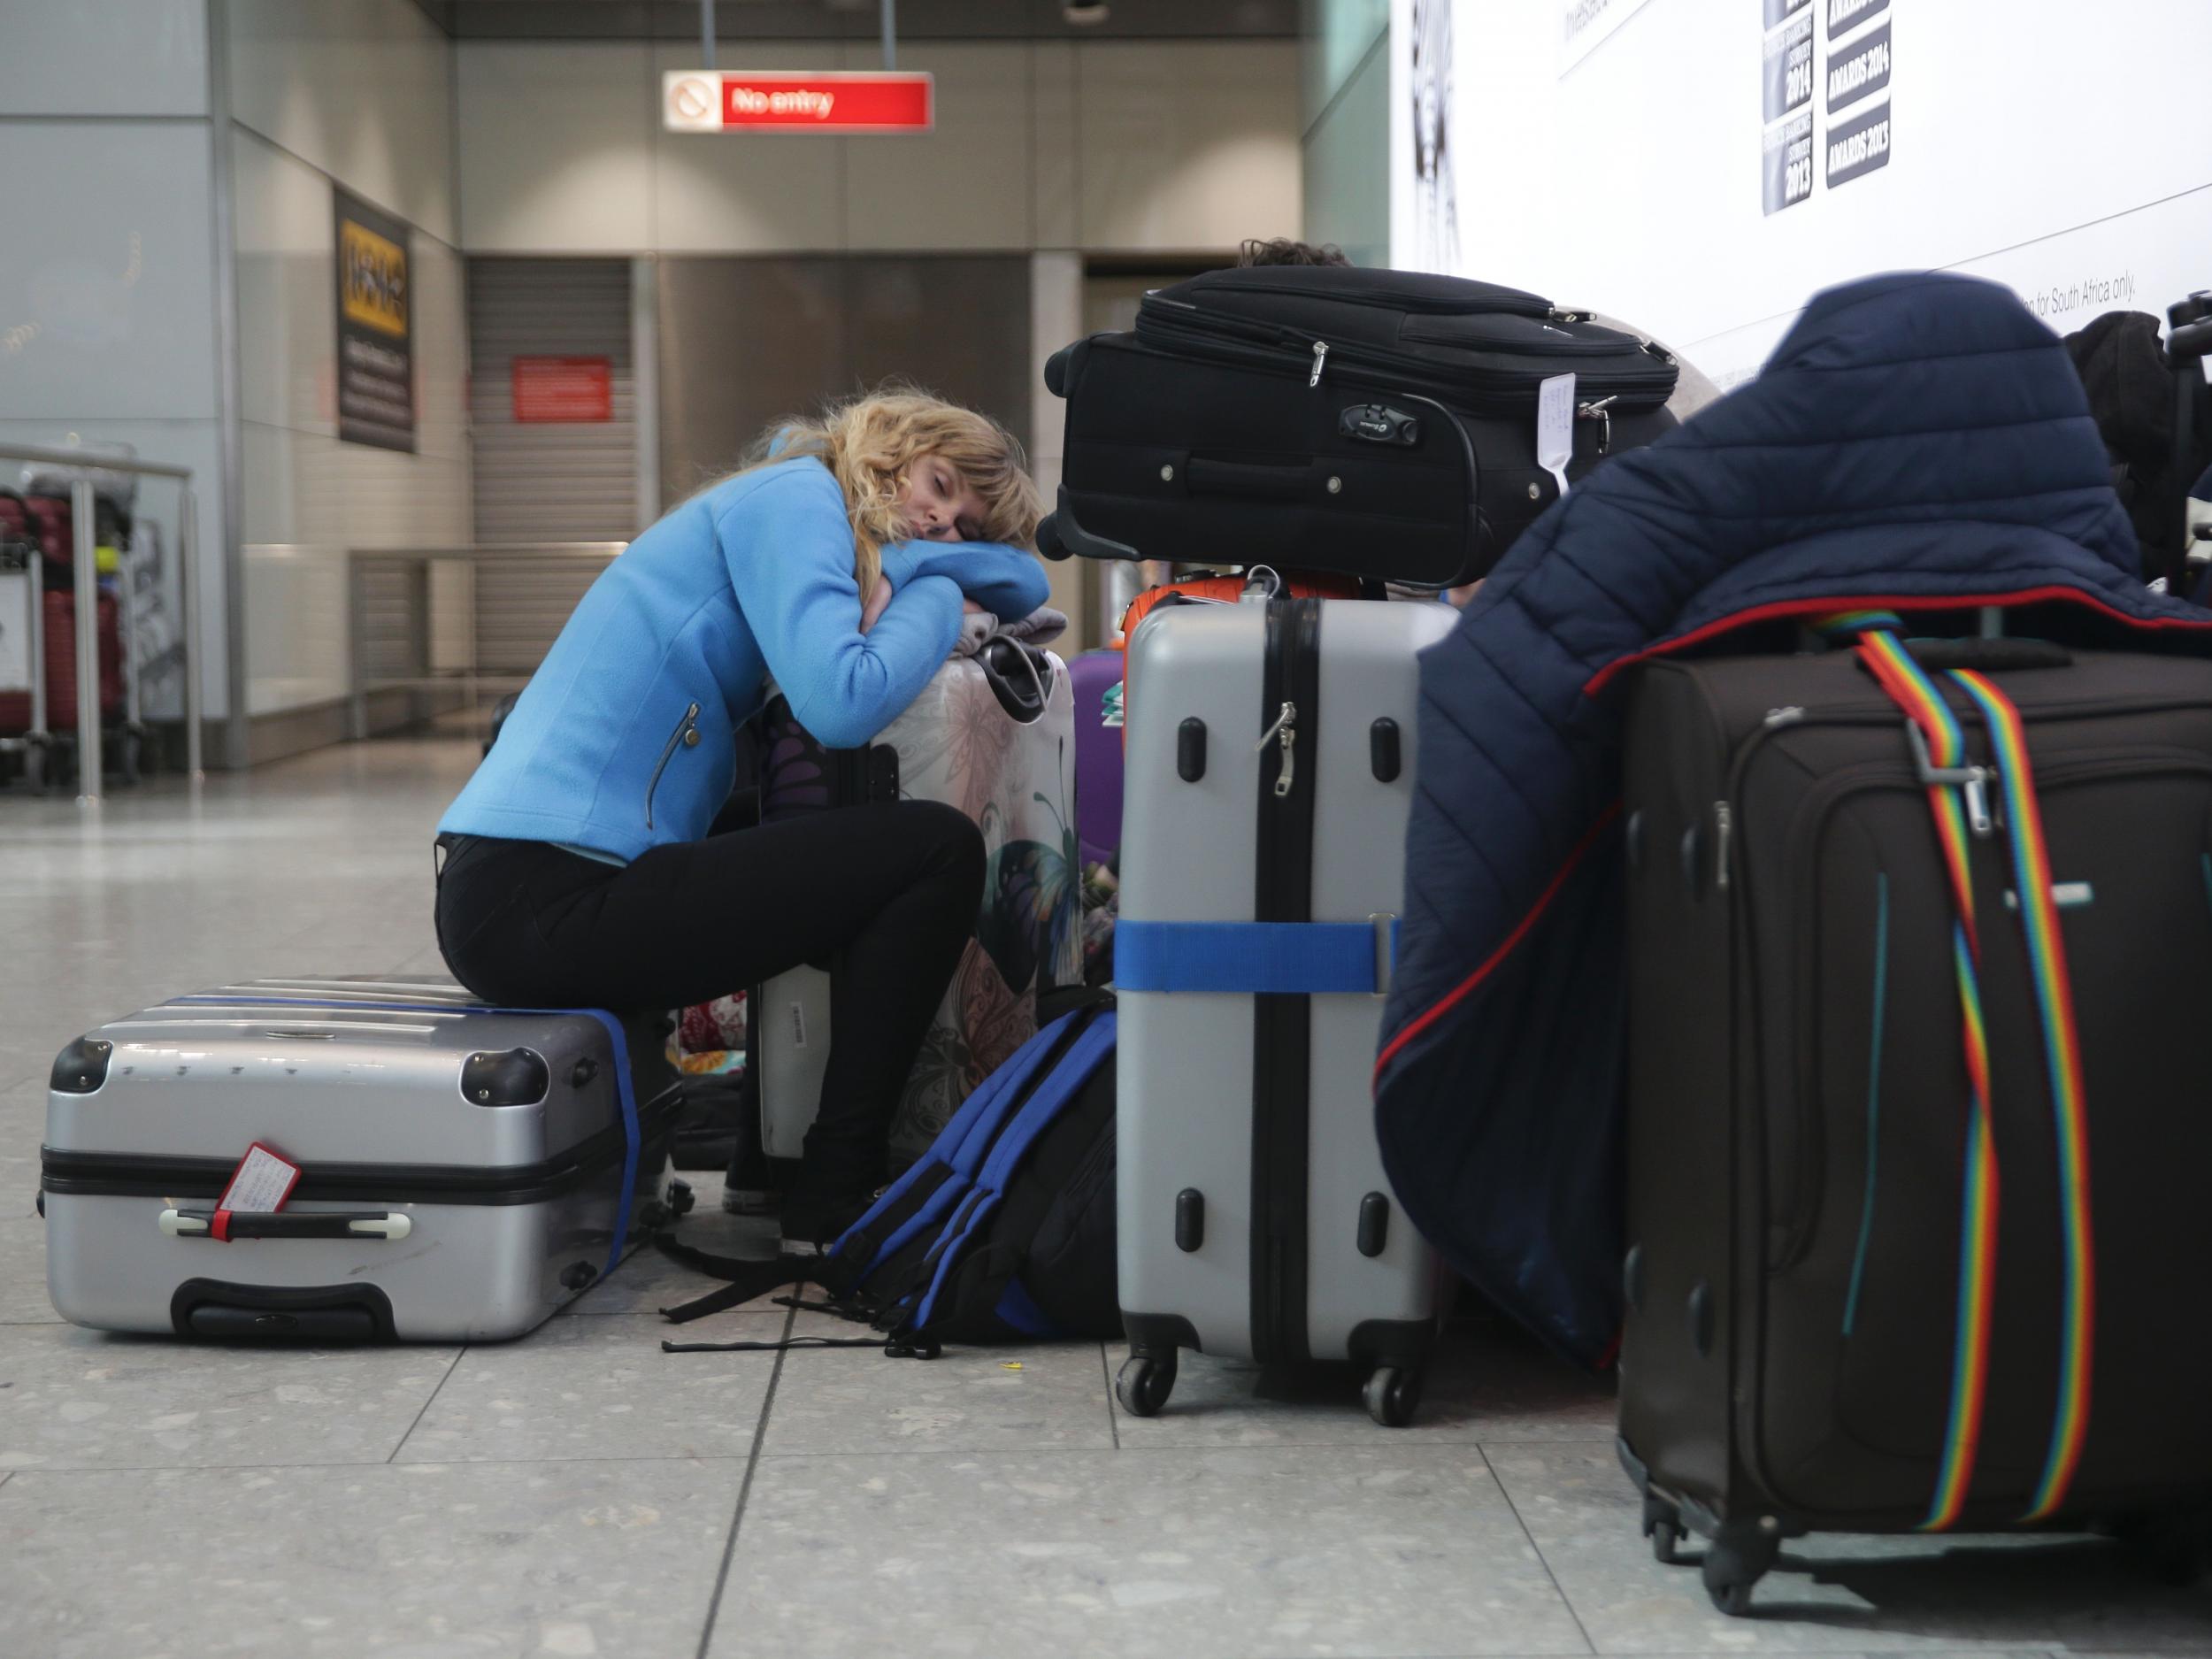 A traveller sleeps next to luggage at Heathrow Airport Terminal 5 after British Airways flights where cancelled after an IT systems failure